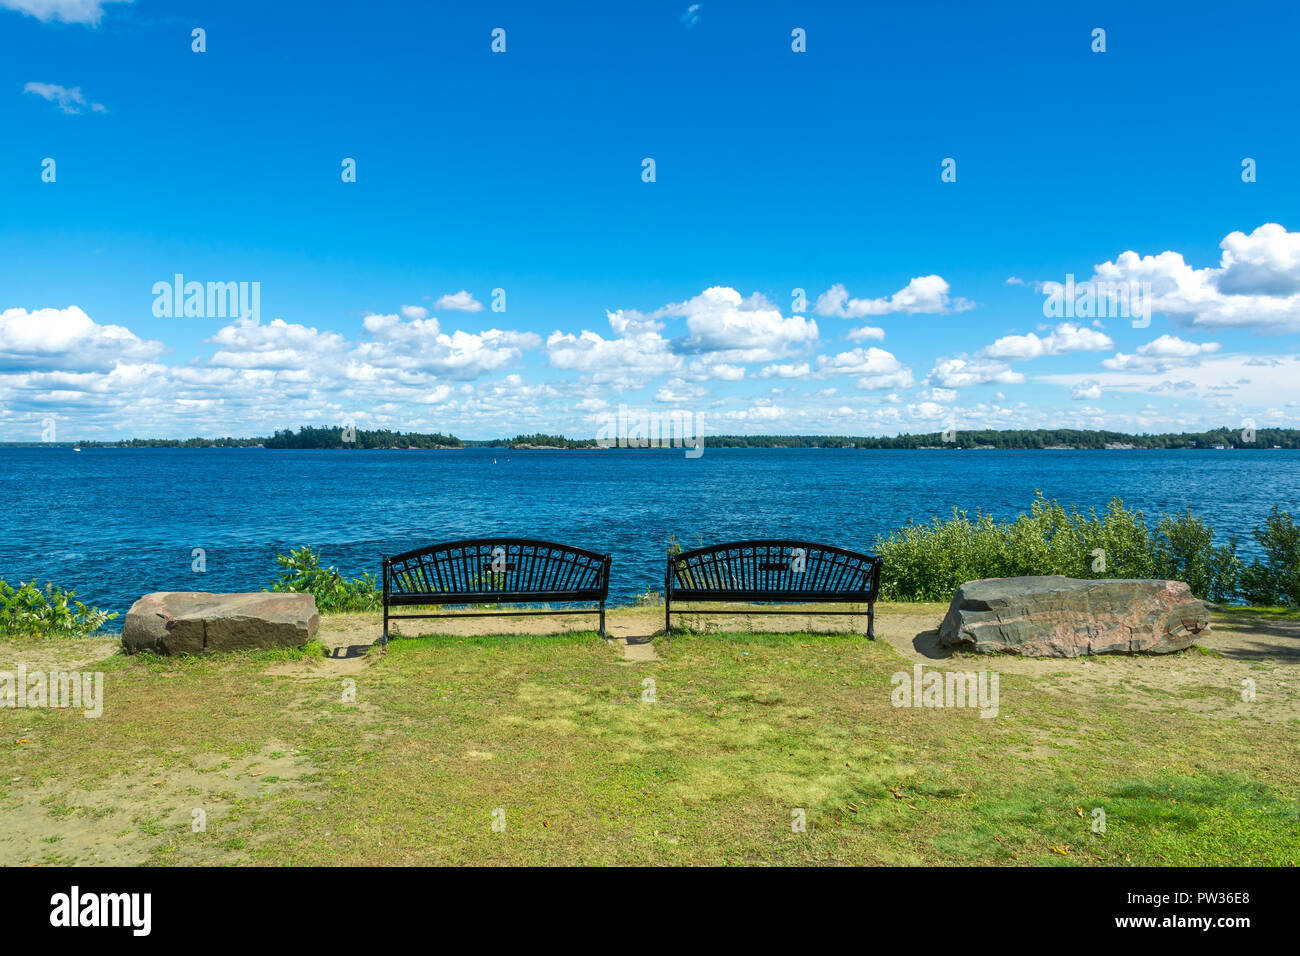 Thousan islands,Canada-august 4,2015:two benches on the banks of the one thousand islands parks in Ontario during a summer day Stock Photo